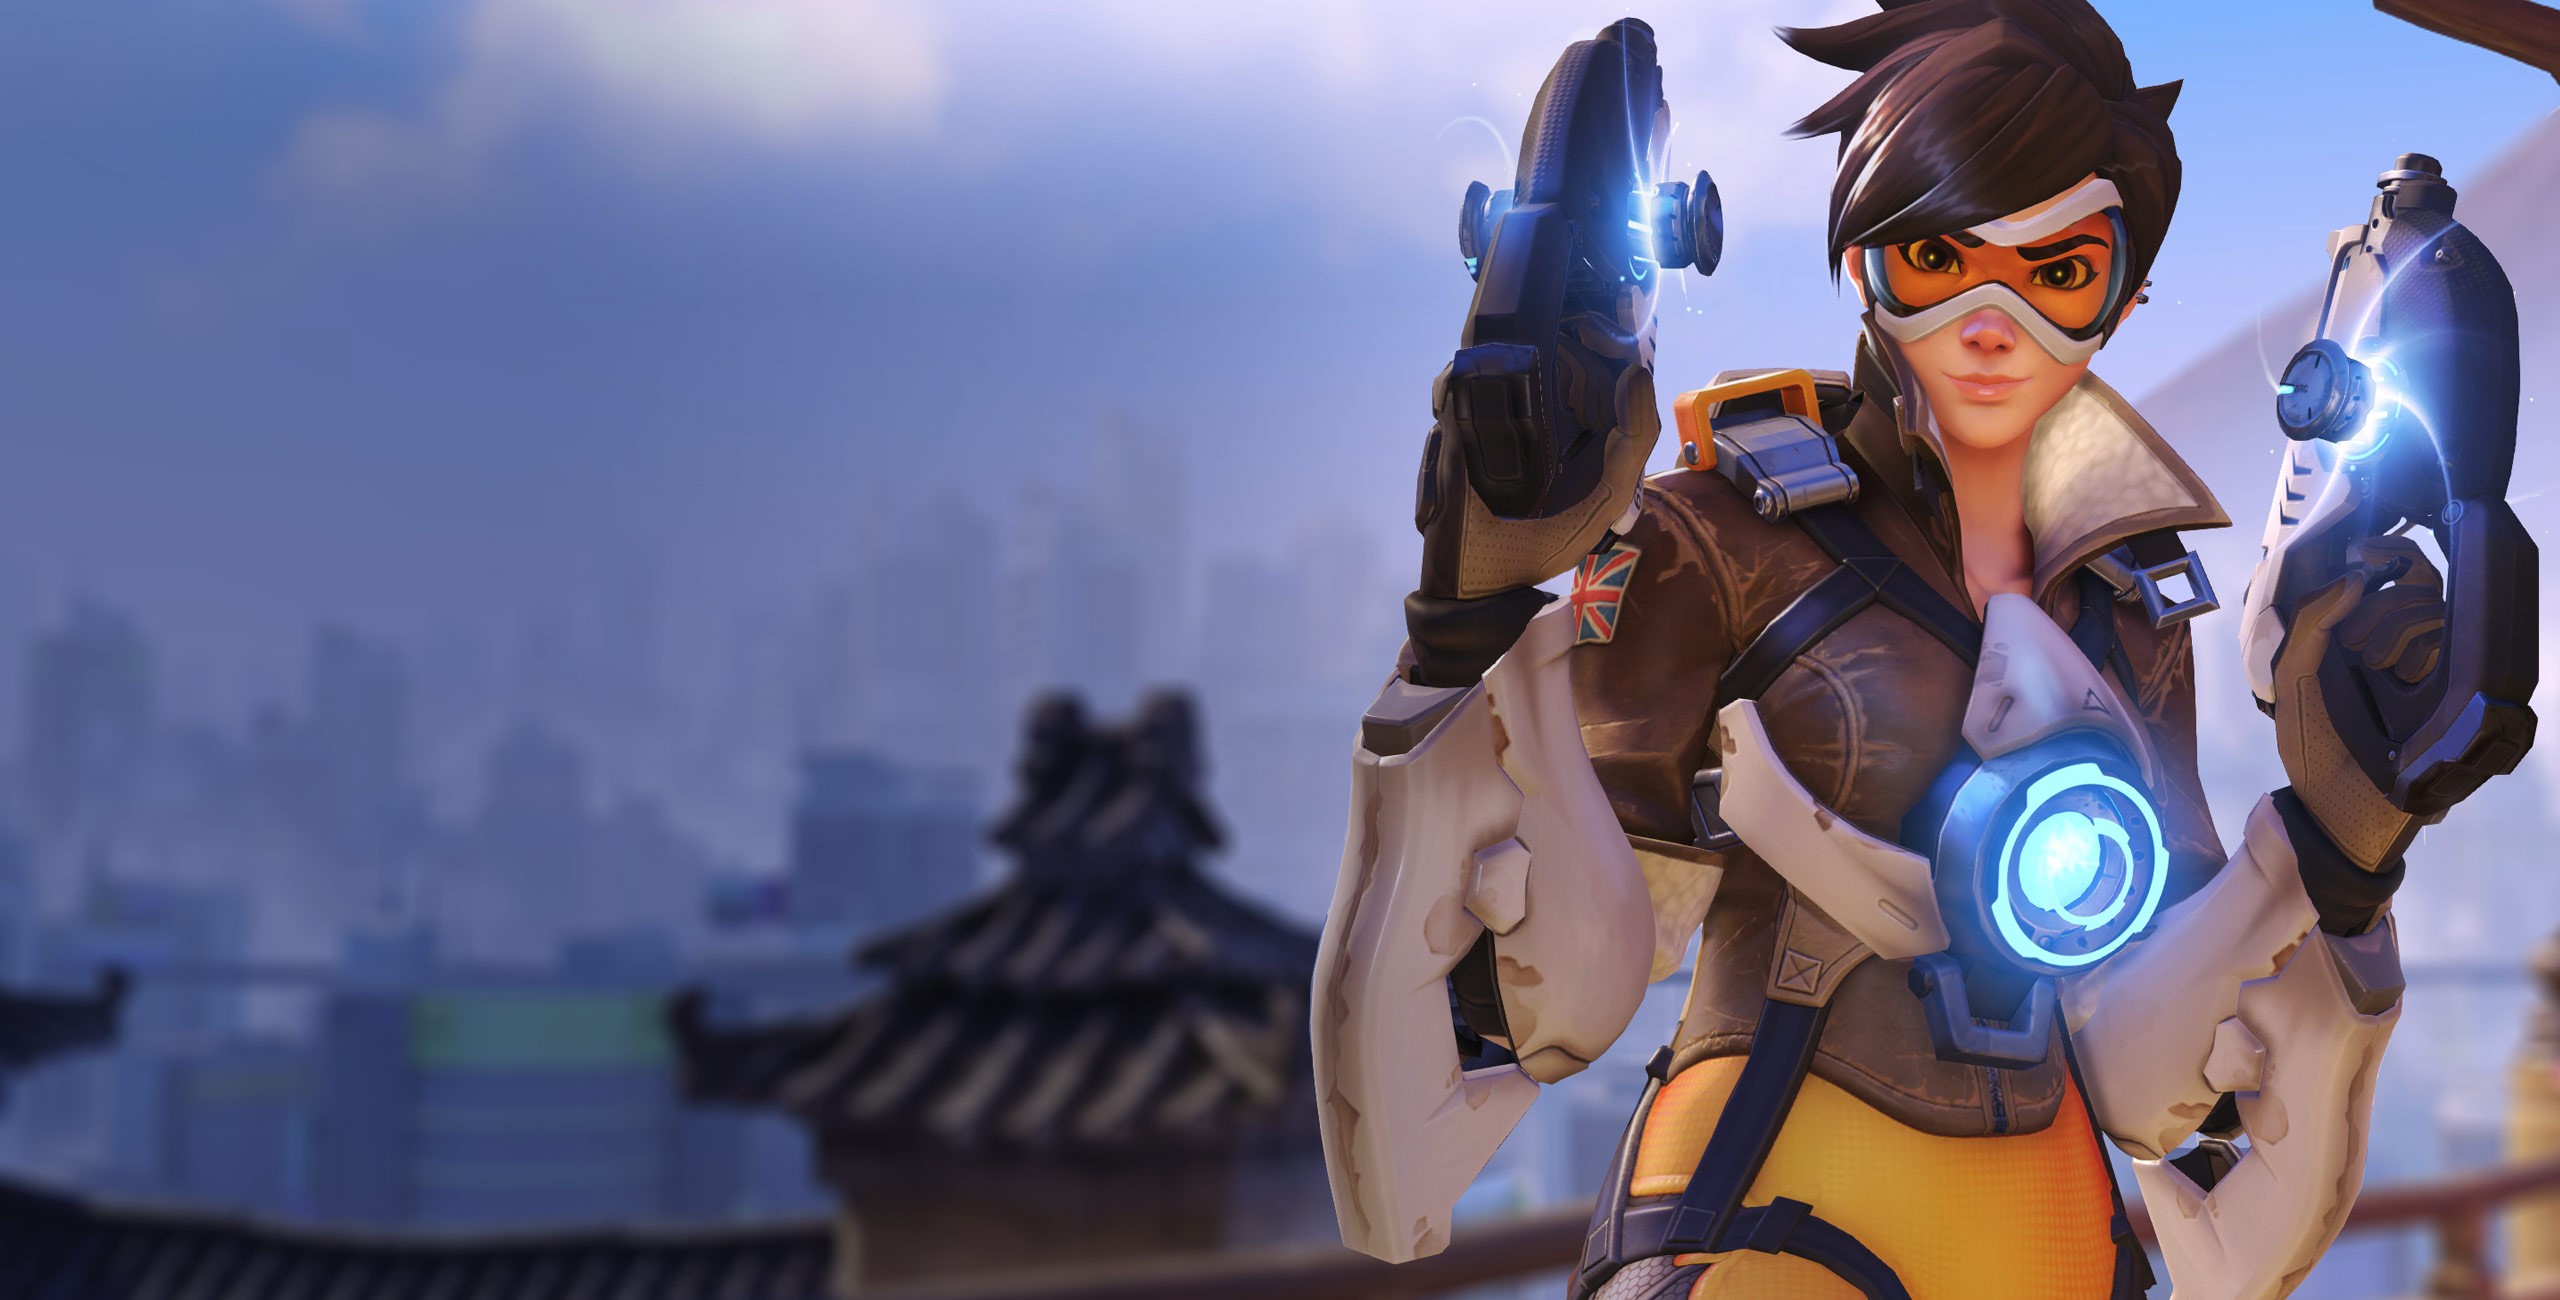 General 2560x1300 Overwatch Tracer (Overwatch) Blizzard Entertainment Hanamura (Overwatch) video games PC gaming video game girls girls with guns